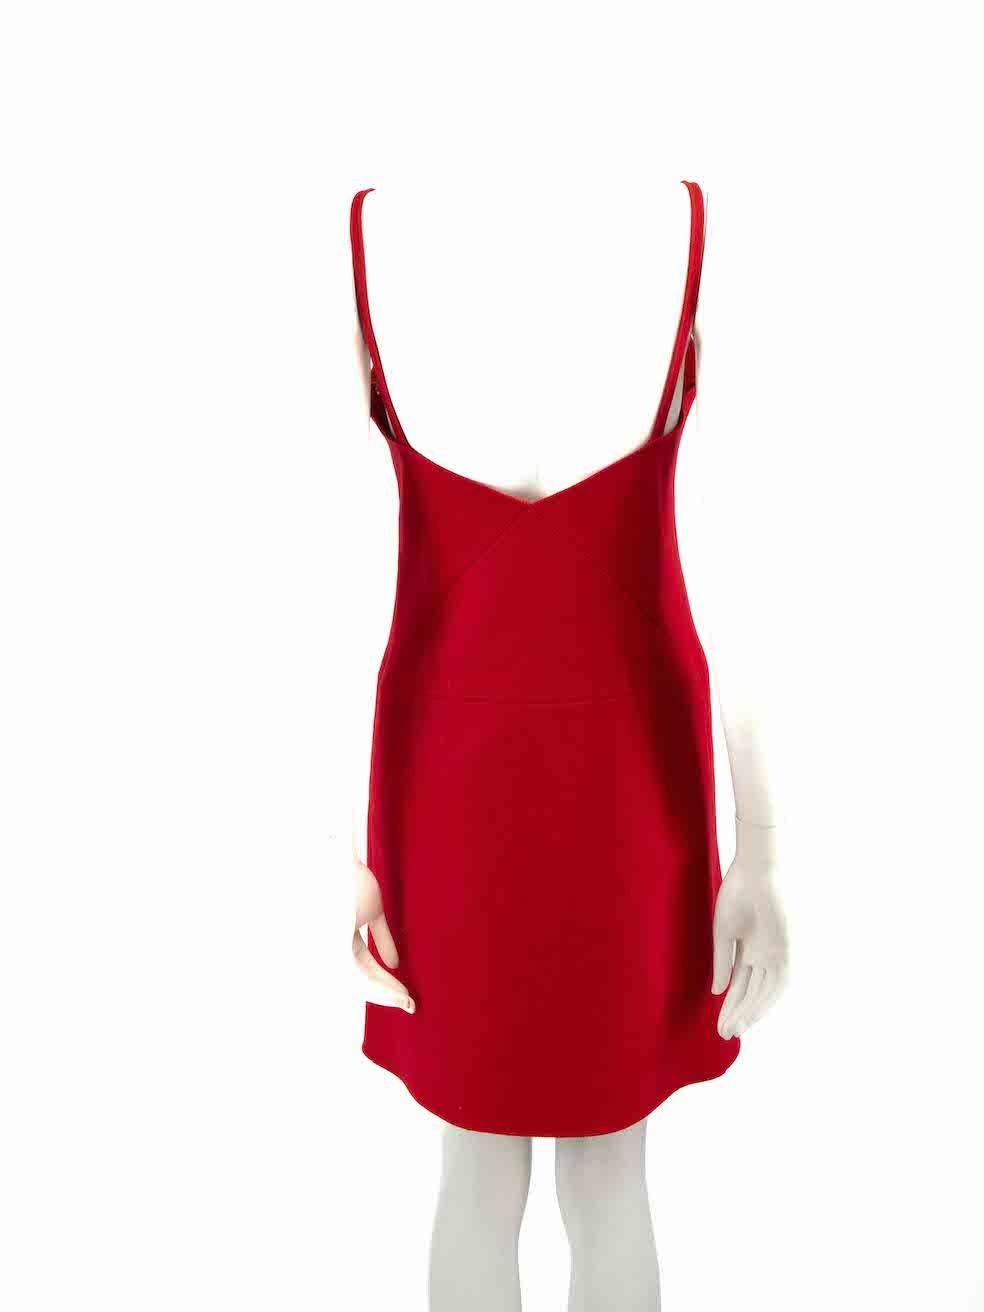 Miu Miu Red Wool Felted Sleeveless Mini Dress Size S In Good Condition For Sale In London, GB